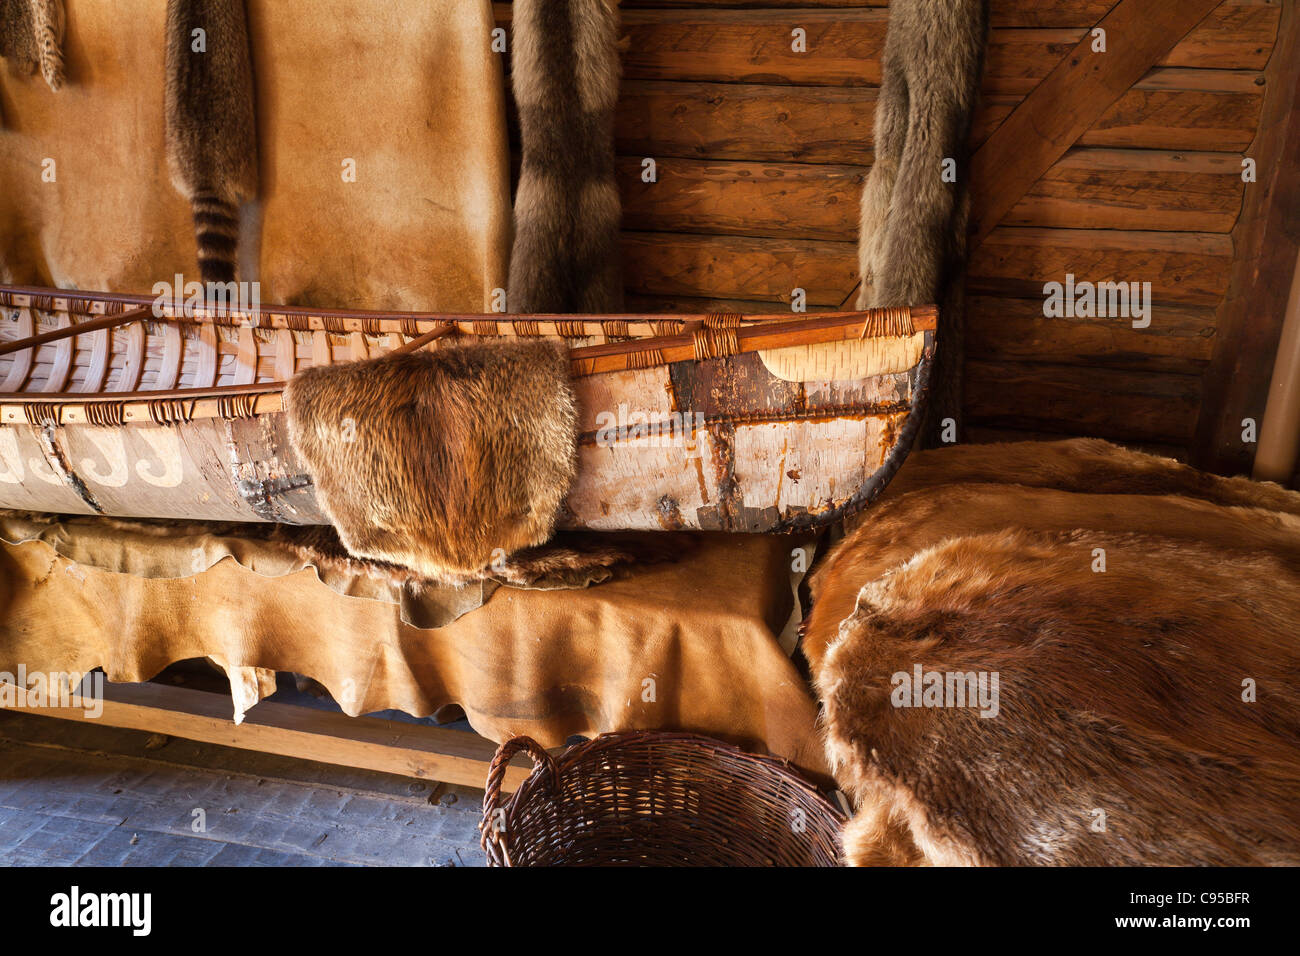 Canoe and Furs in a storage room at the Port Royal Habitation. The reconstructed Port Royal Habitation built in the early 1600s Stock Photo